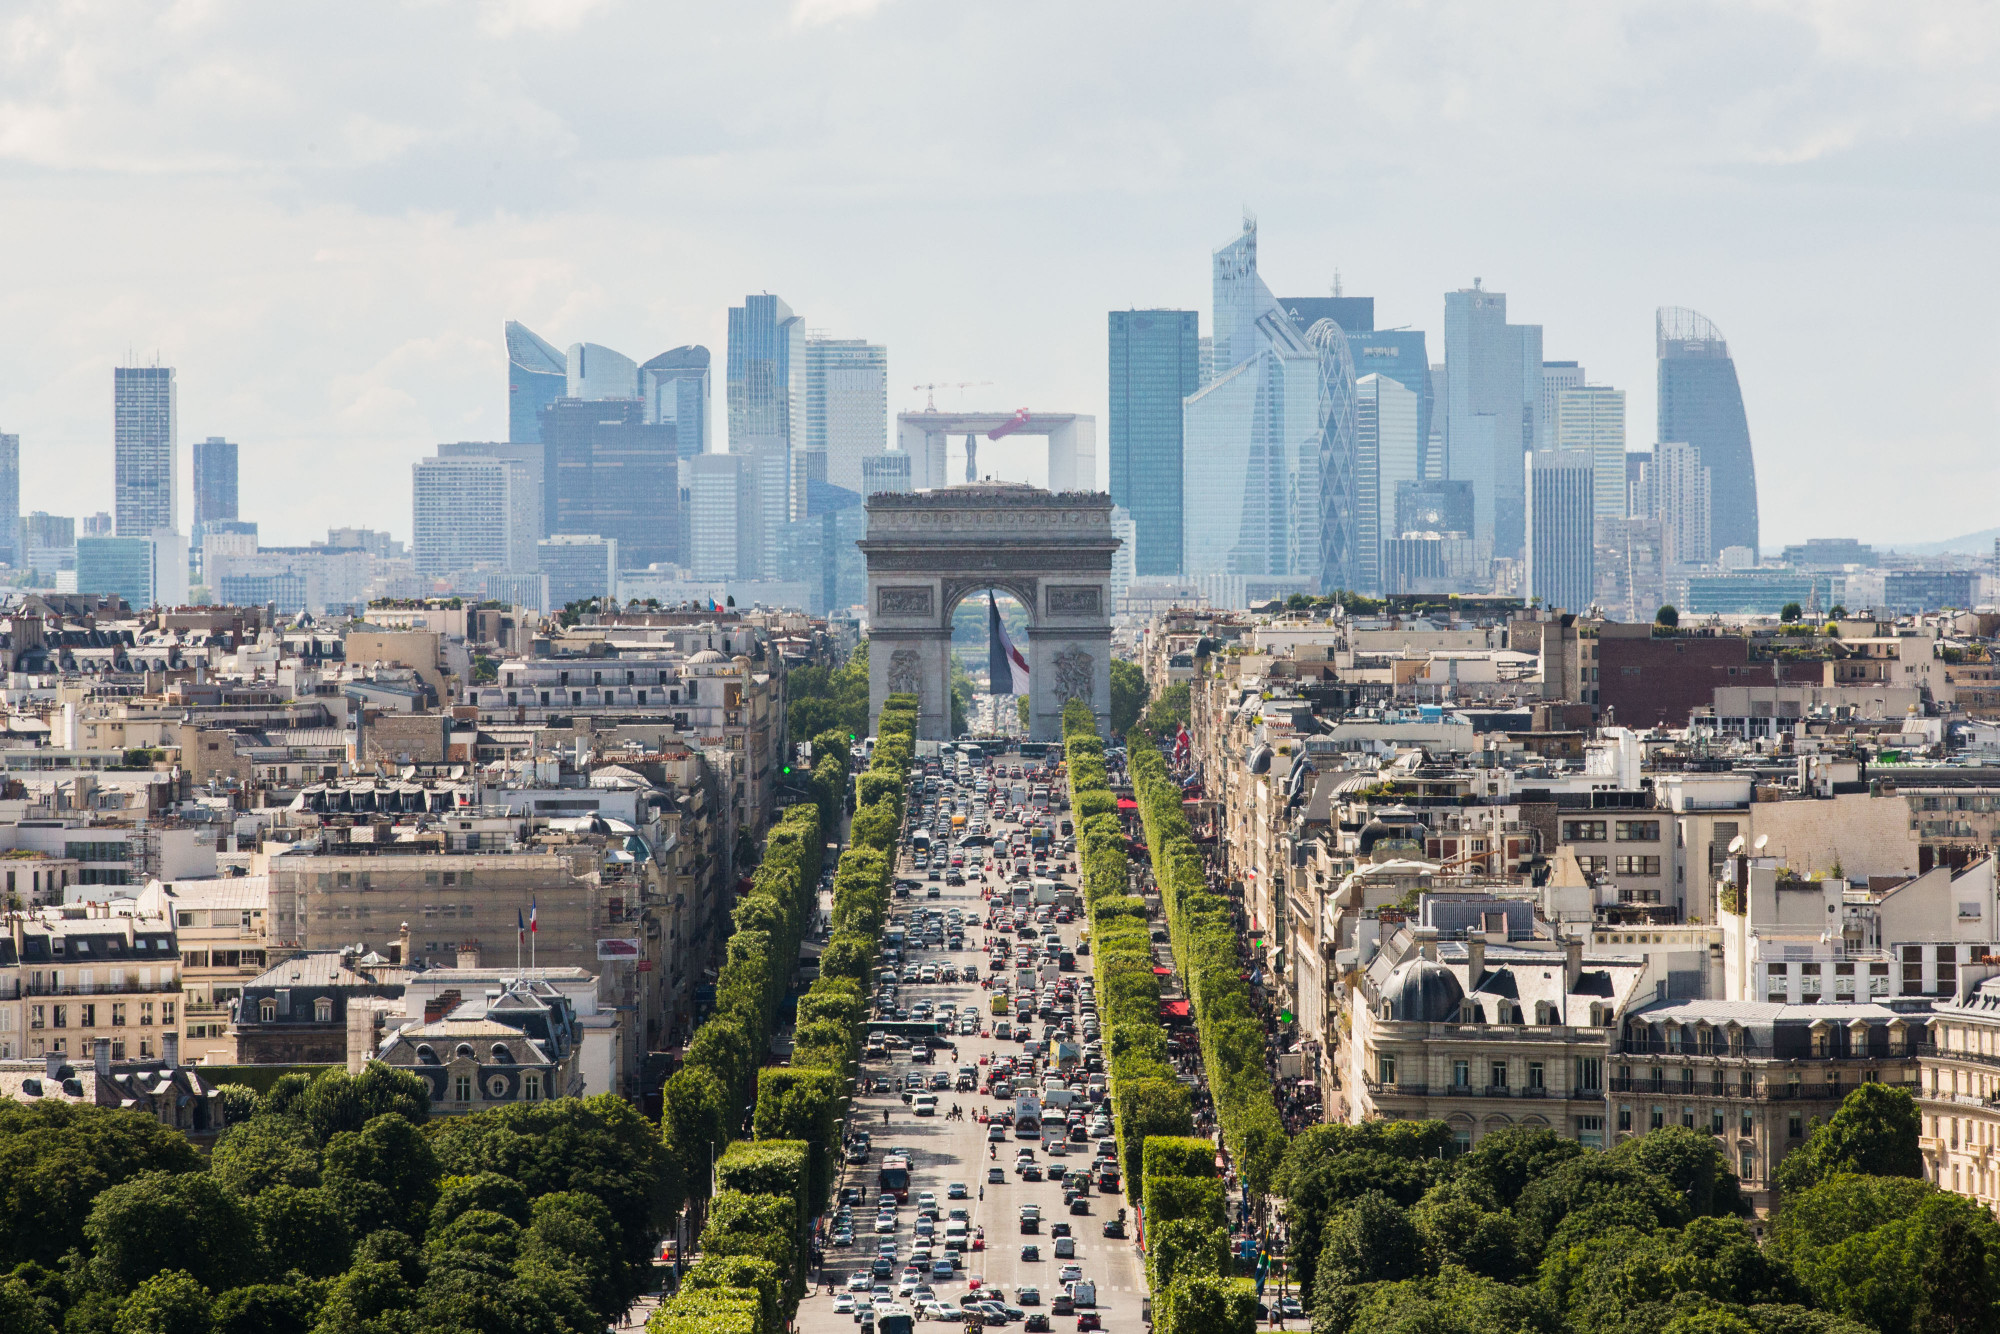 Champs-Elysees Building Sells for More Than $600 Million in Record